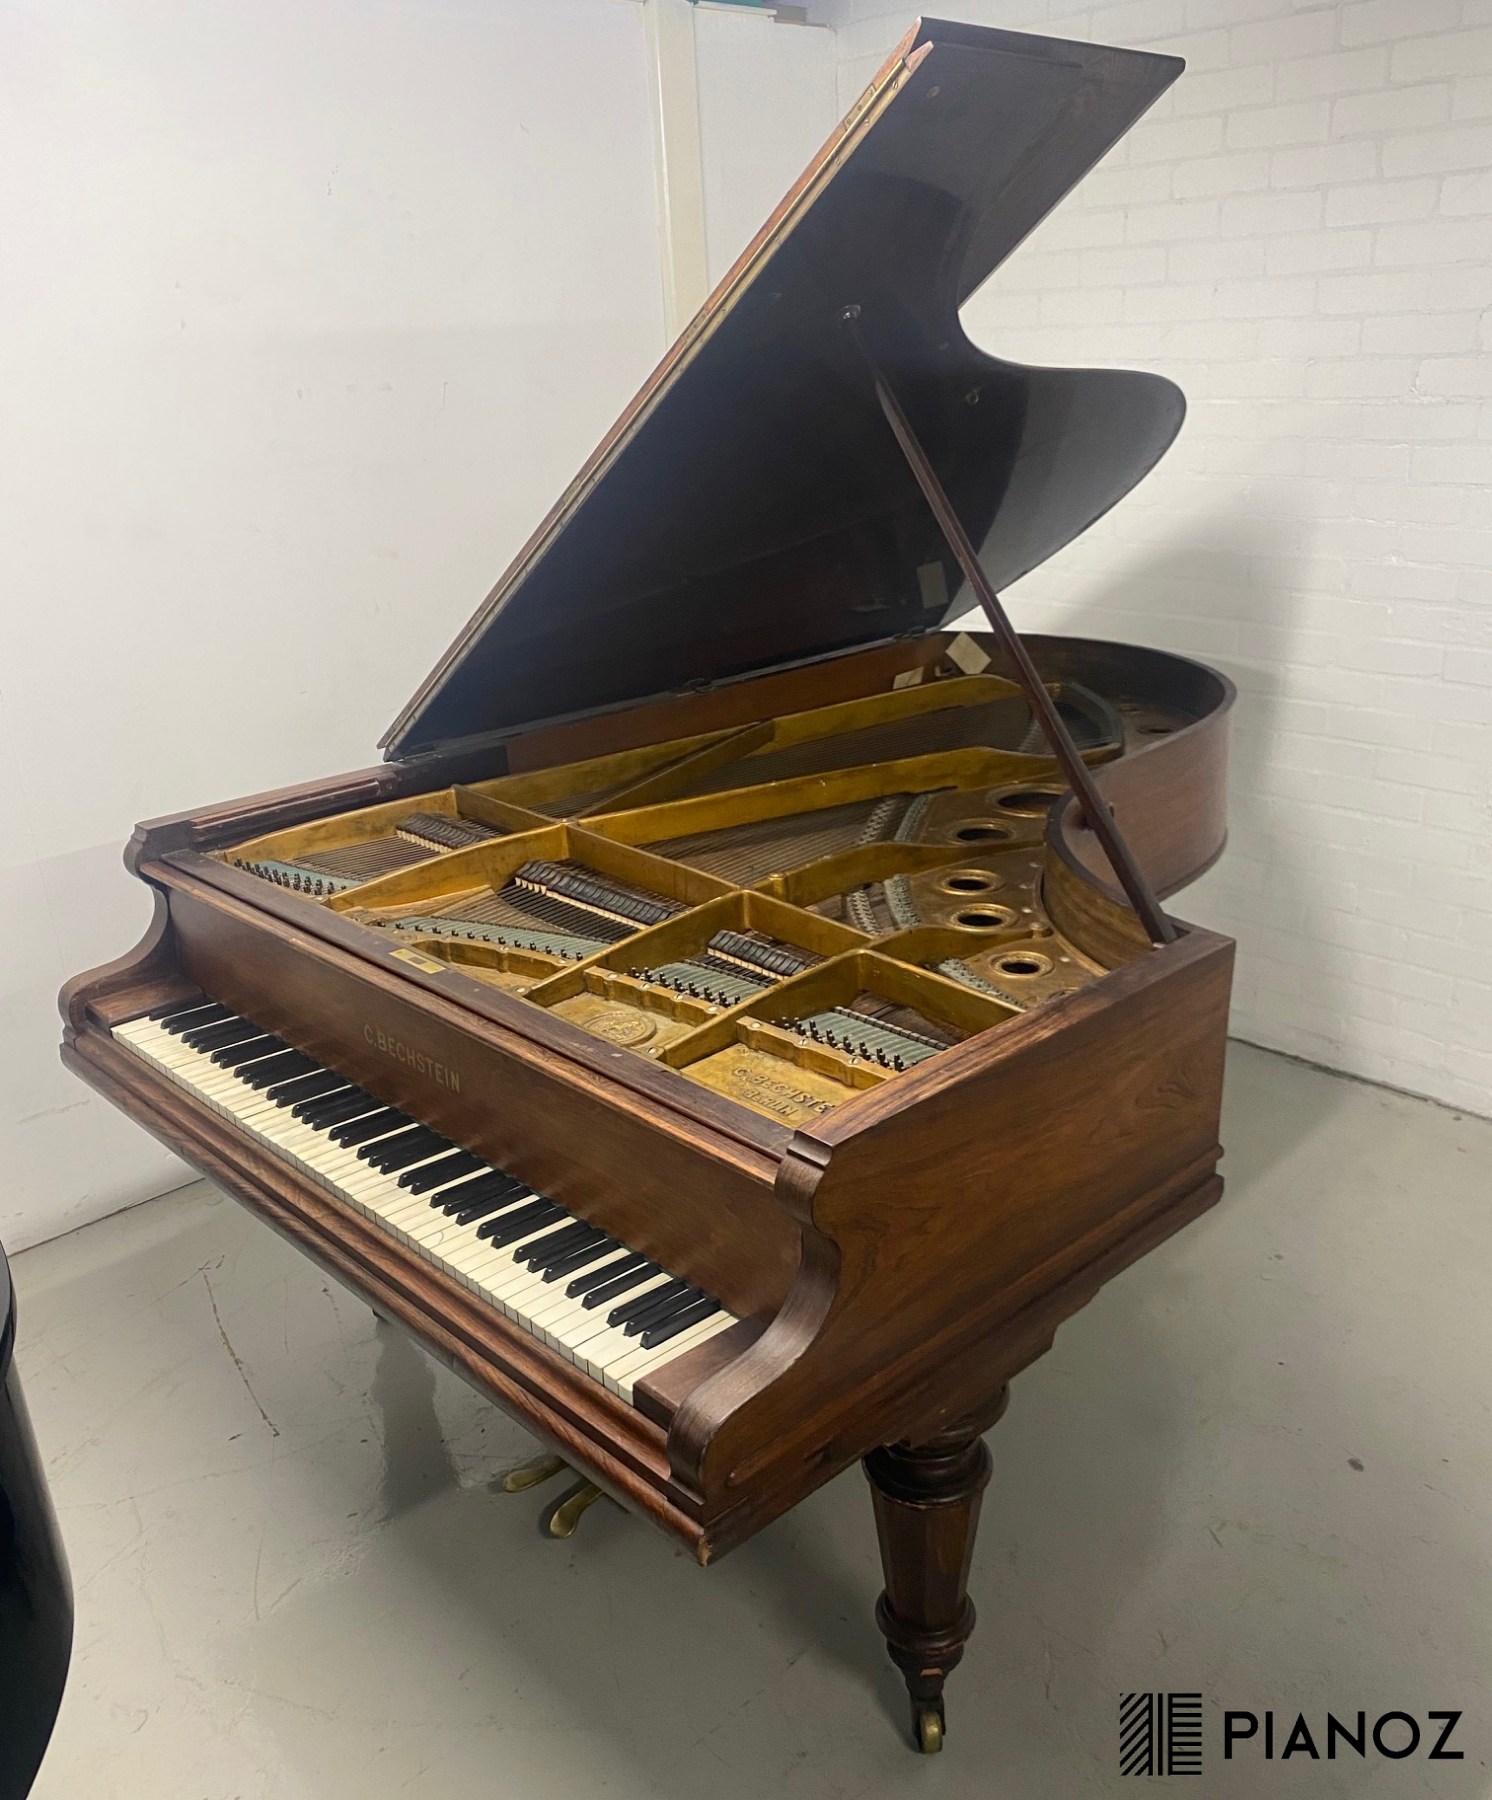 C. Bechstein IVa Semi Concert Grand piano for sale in UK